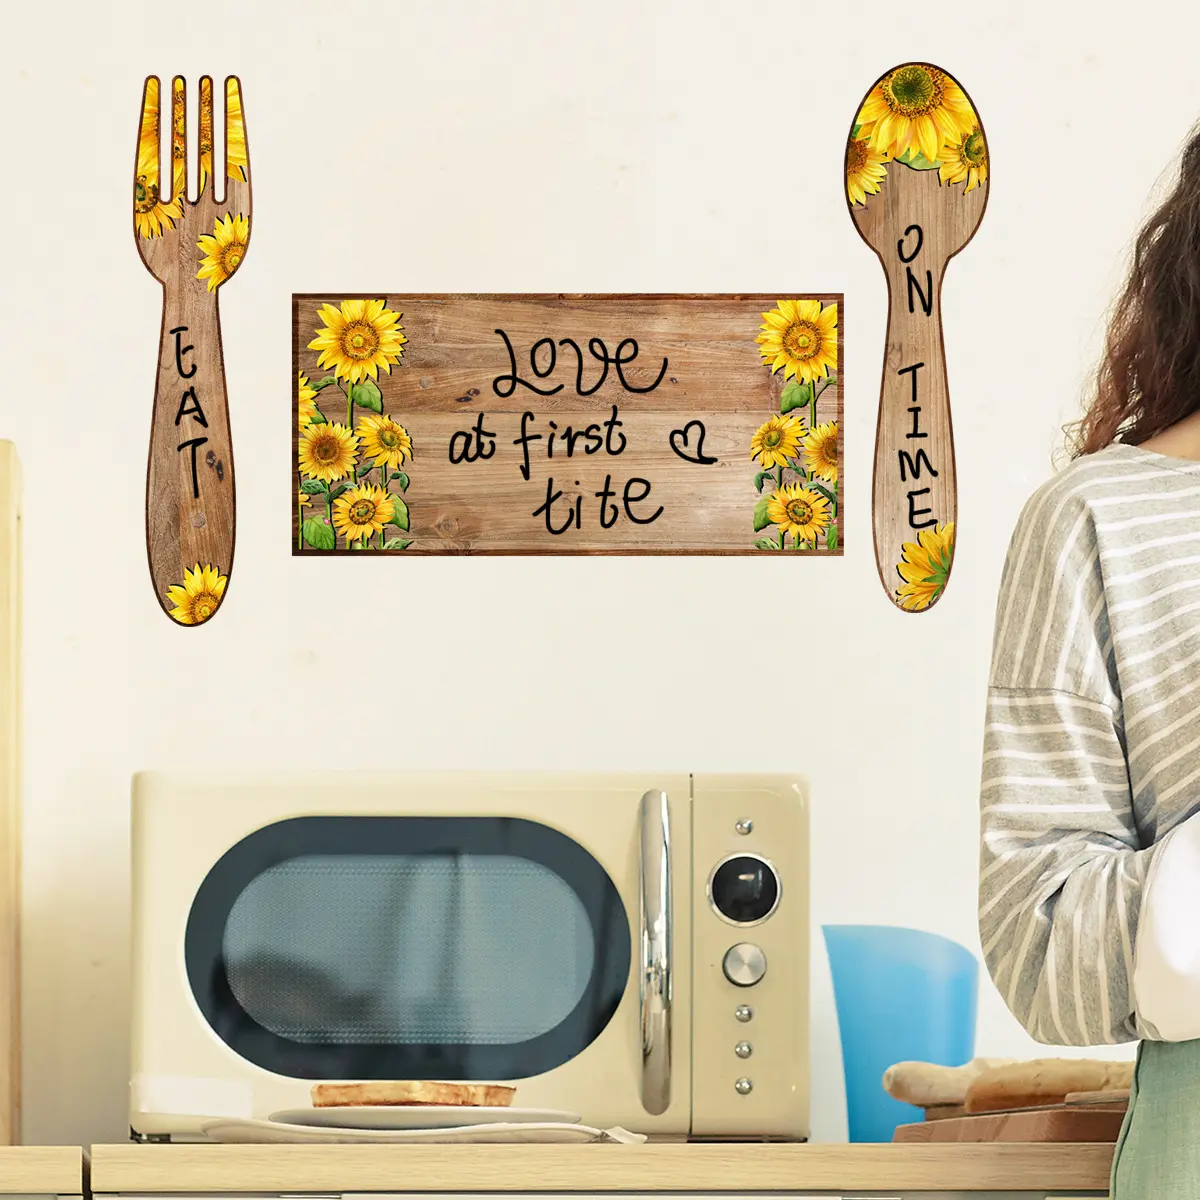 Log Knife And Fork Sunflower Wall Sticker For Kitchen Decoration And Promotion Self-adhesive Wallpaper